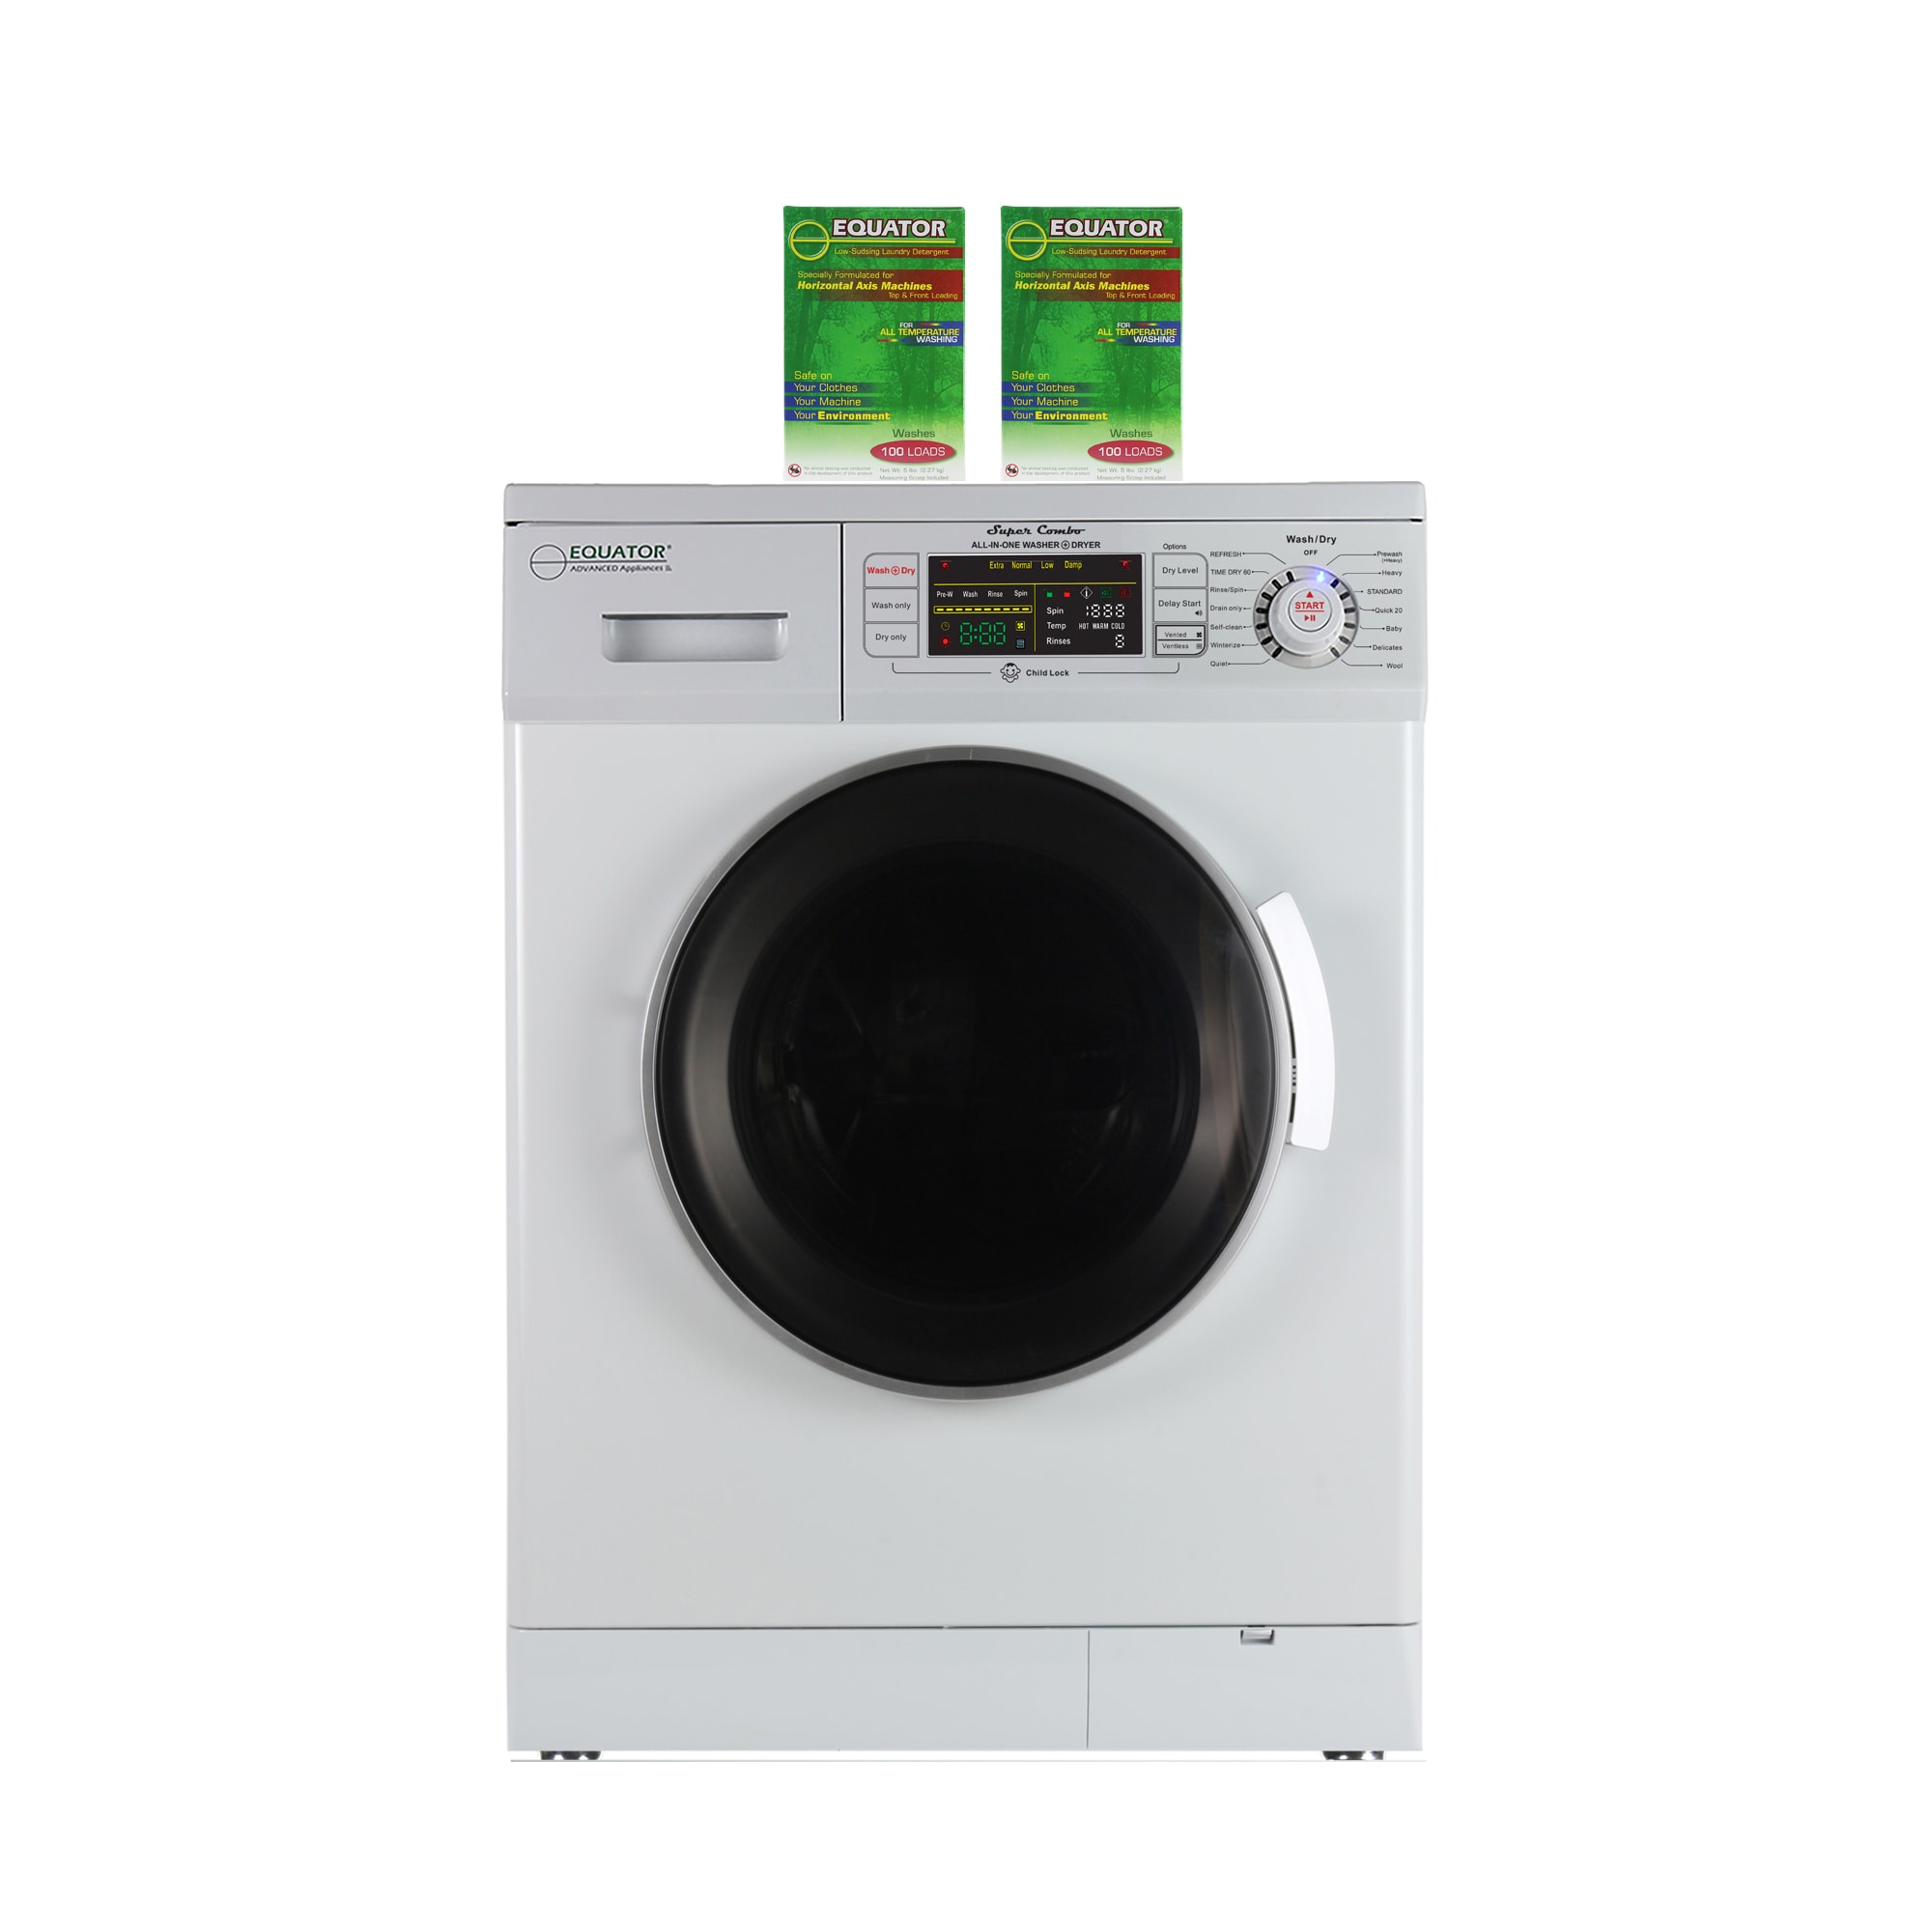 1.6-cu ft Capacity White Ventless All-in-One Washer/Dryer Combo Stainless Steel | - Equator Advanced Appliances EZ4400 N + 2 HE